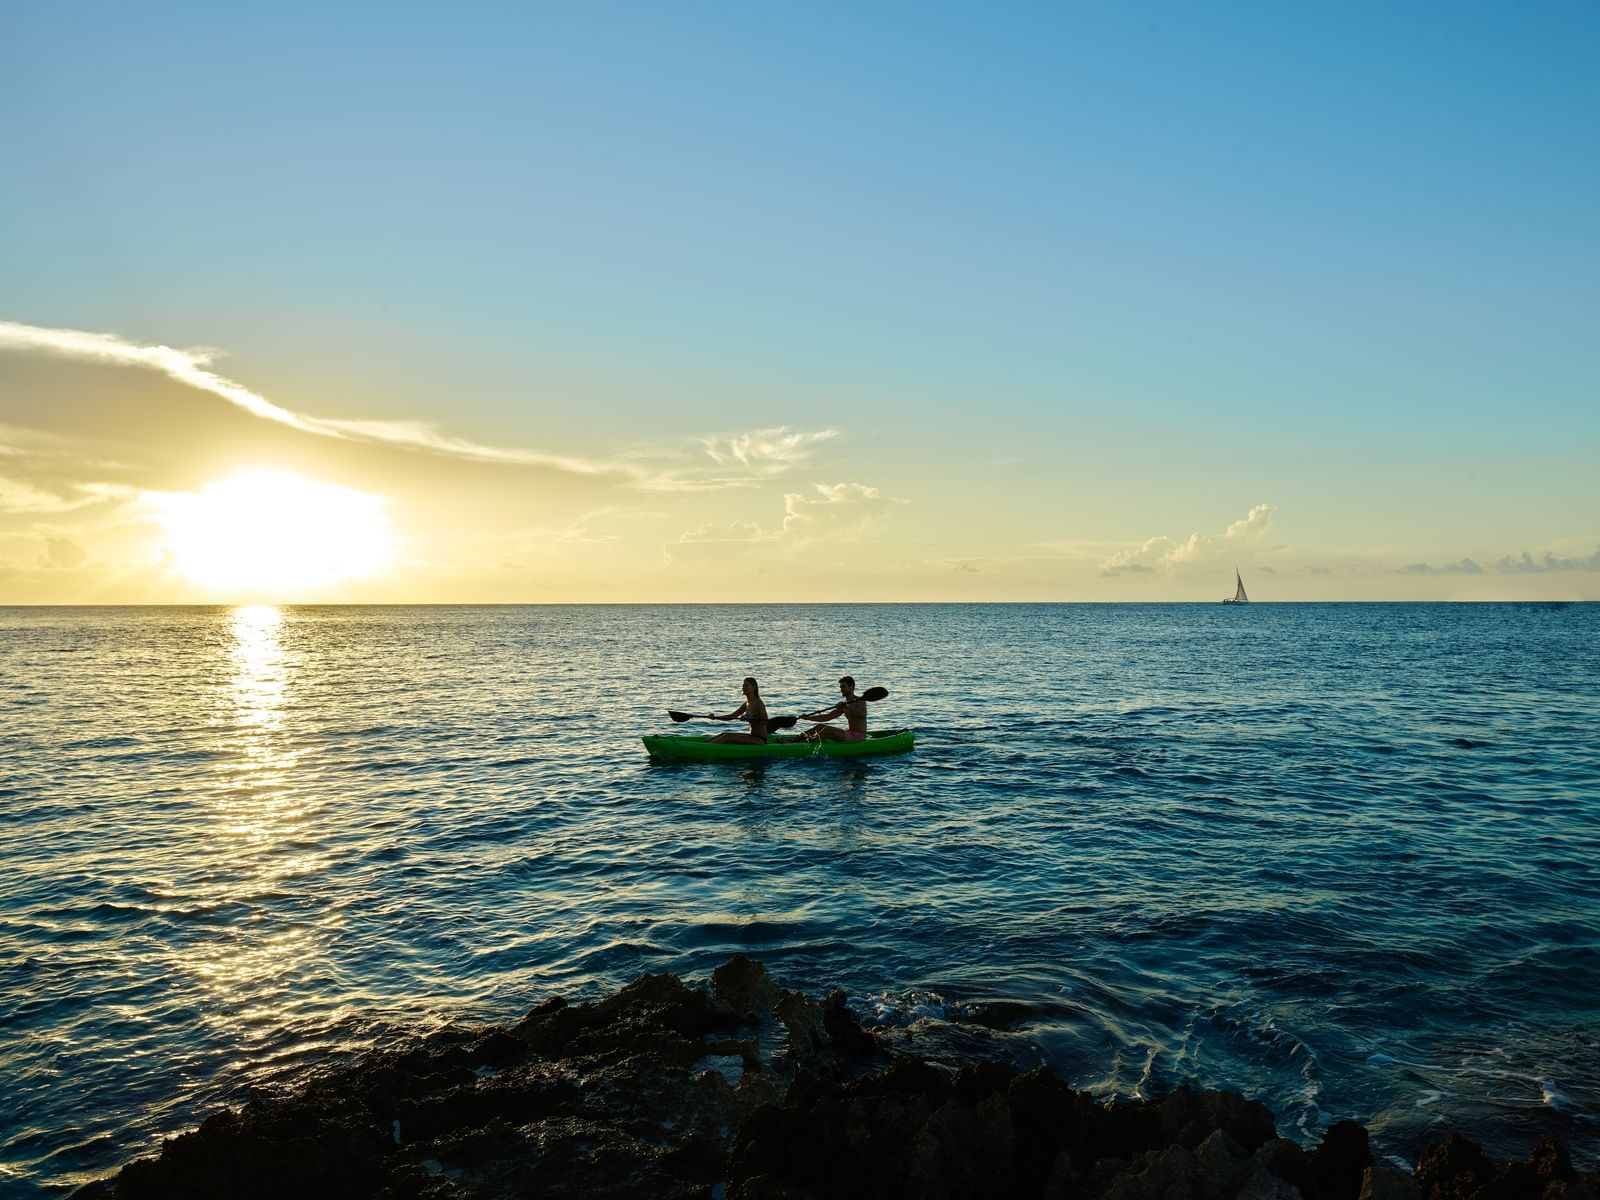 Two people in a kayak paddling on the sea at sunset near The Explorean Resorts